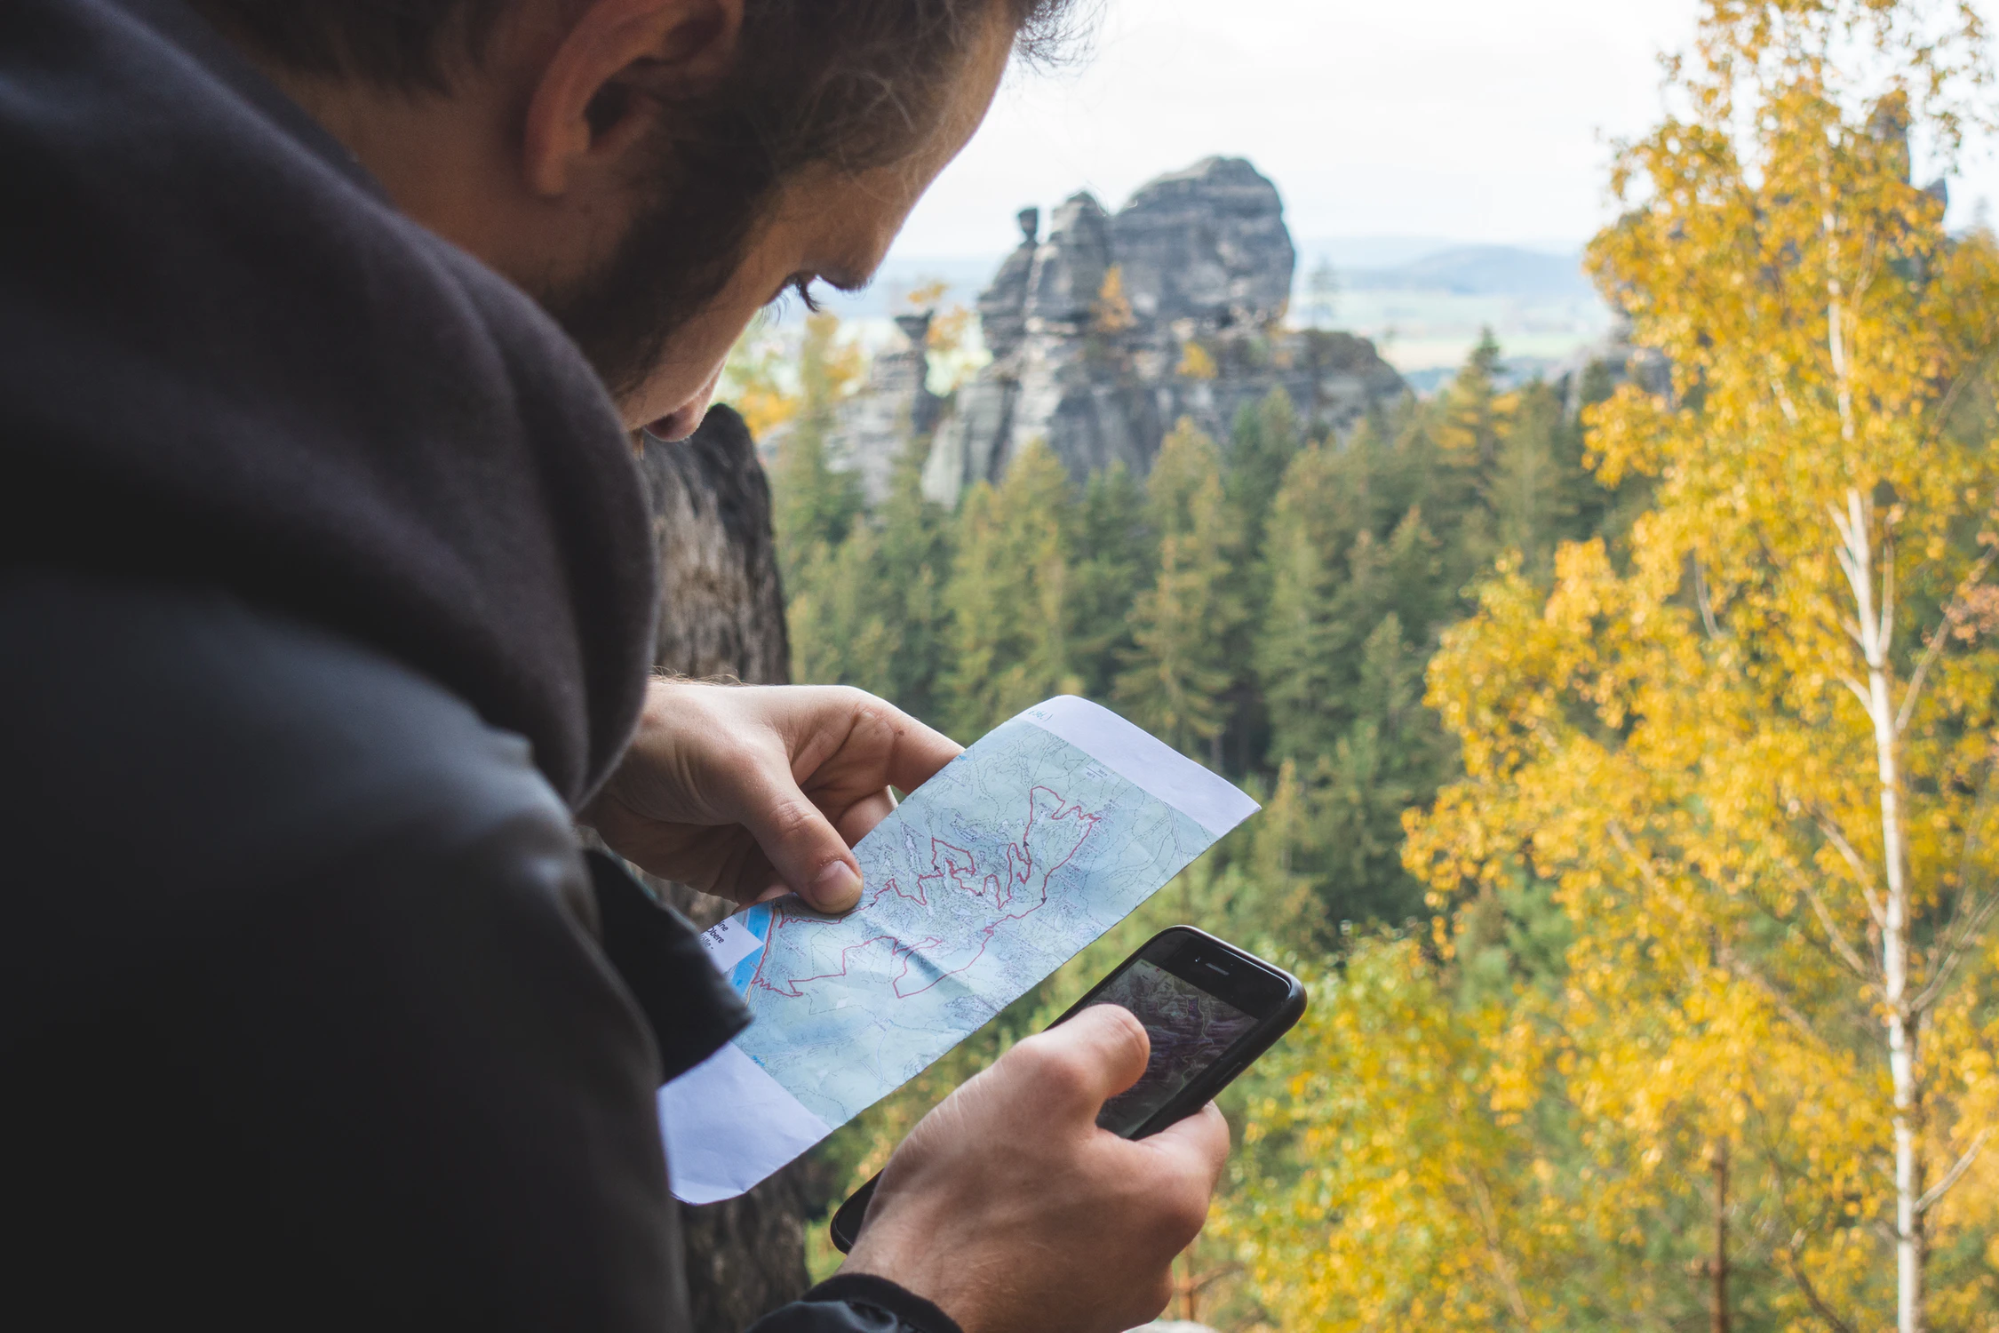 A person in the woods is looking at a paper map while also holding their smartphone.